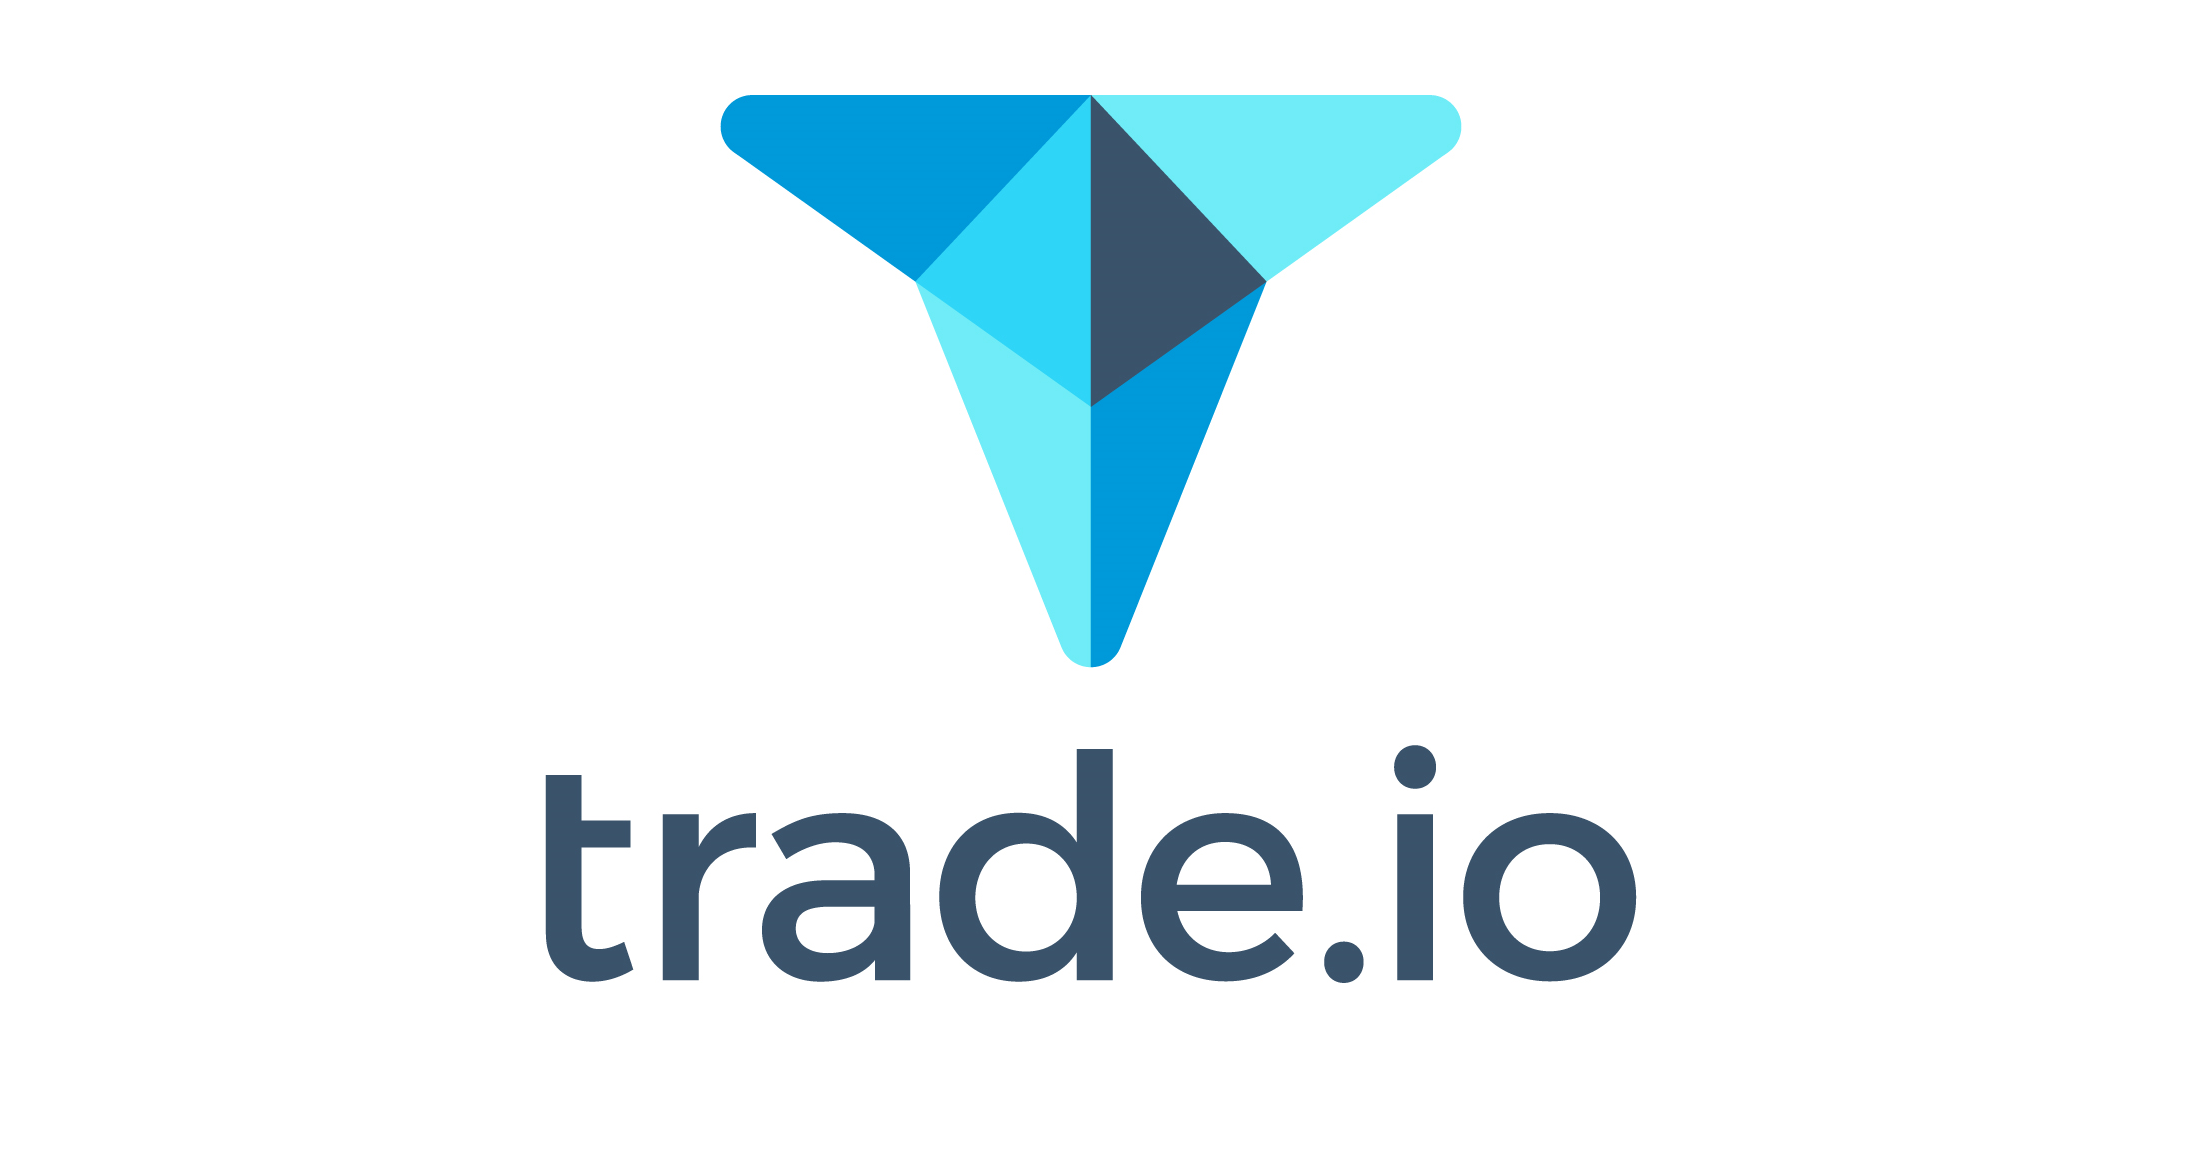 PR: trade.io Announces Historic Partnerships & Introduces Tiered Structure Further to Community Demand